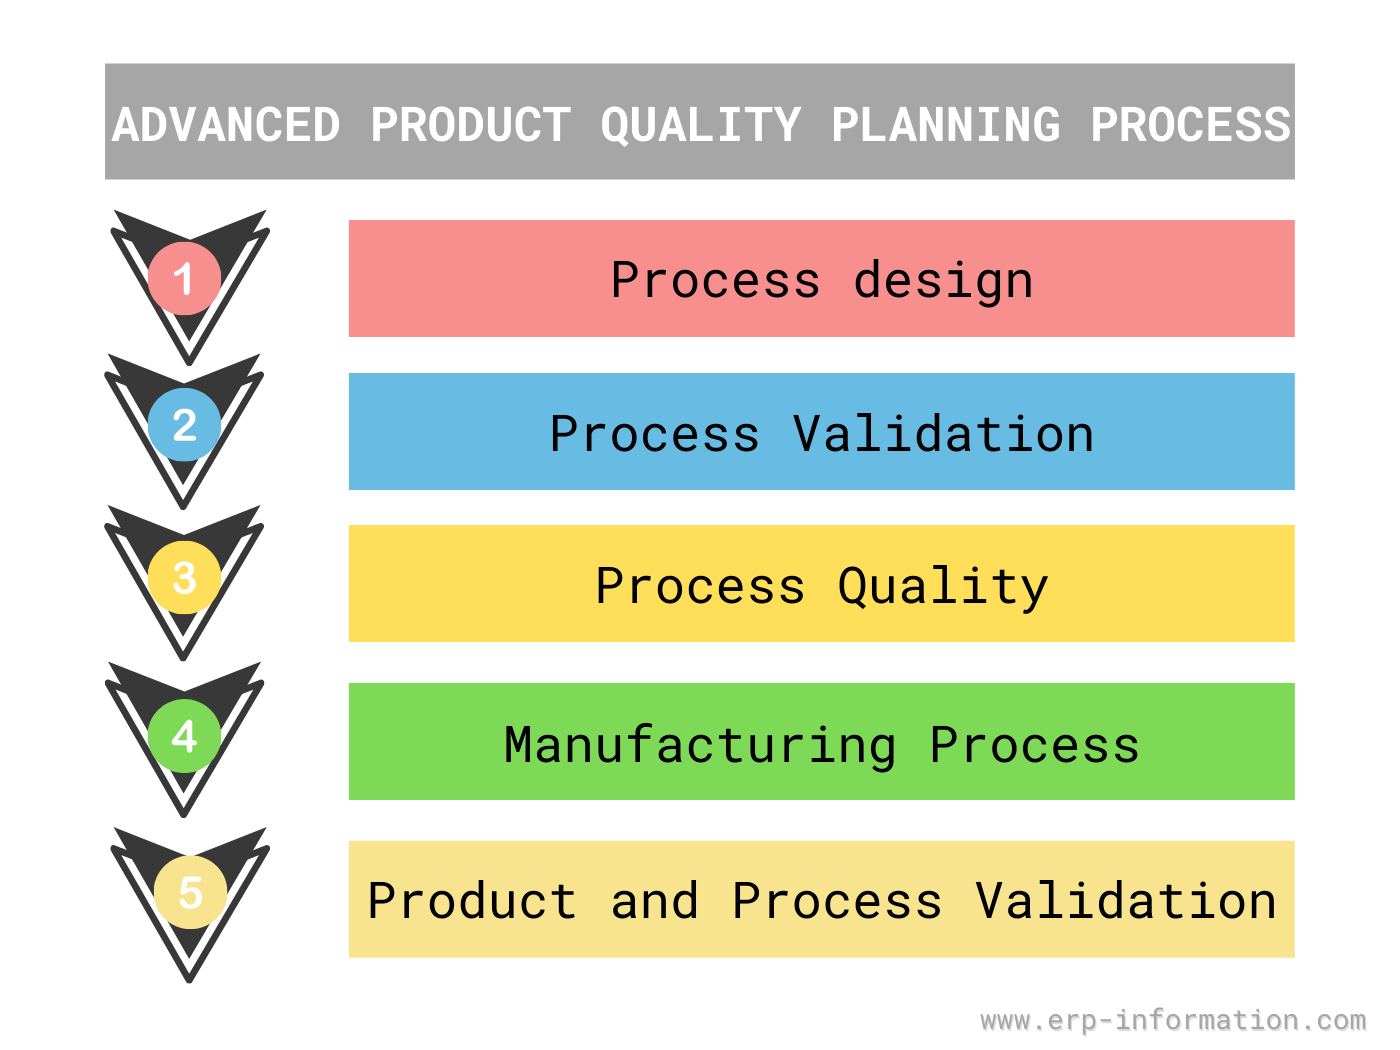 Apqp Advanced Product Quality Planning And Control Pl - vrogue.co